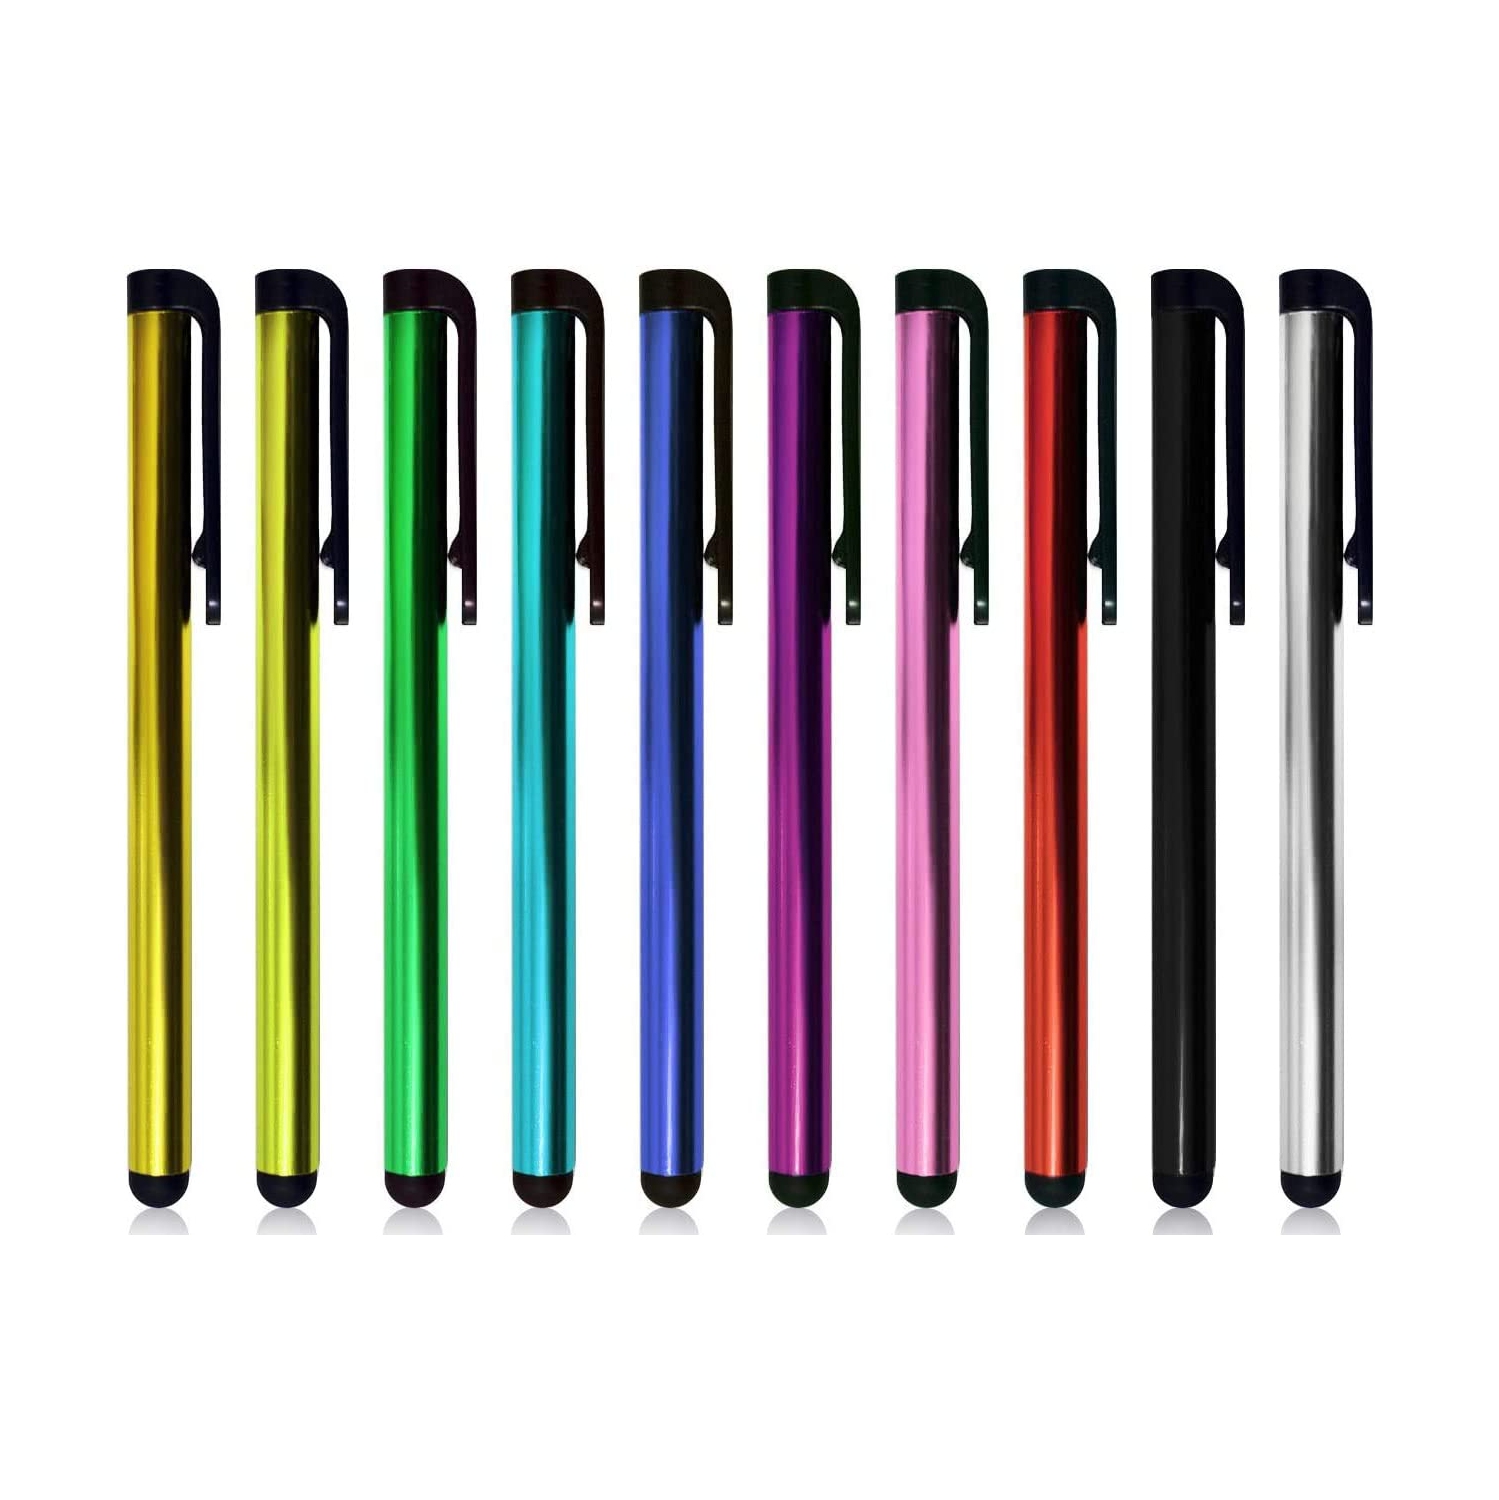 10 x Universal Metal Stylus Touch Screen Pens for Smart Phones/Apple iPhone/iPad / Tablet and Other Devices.